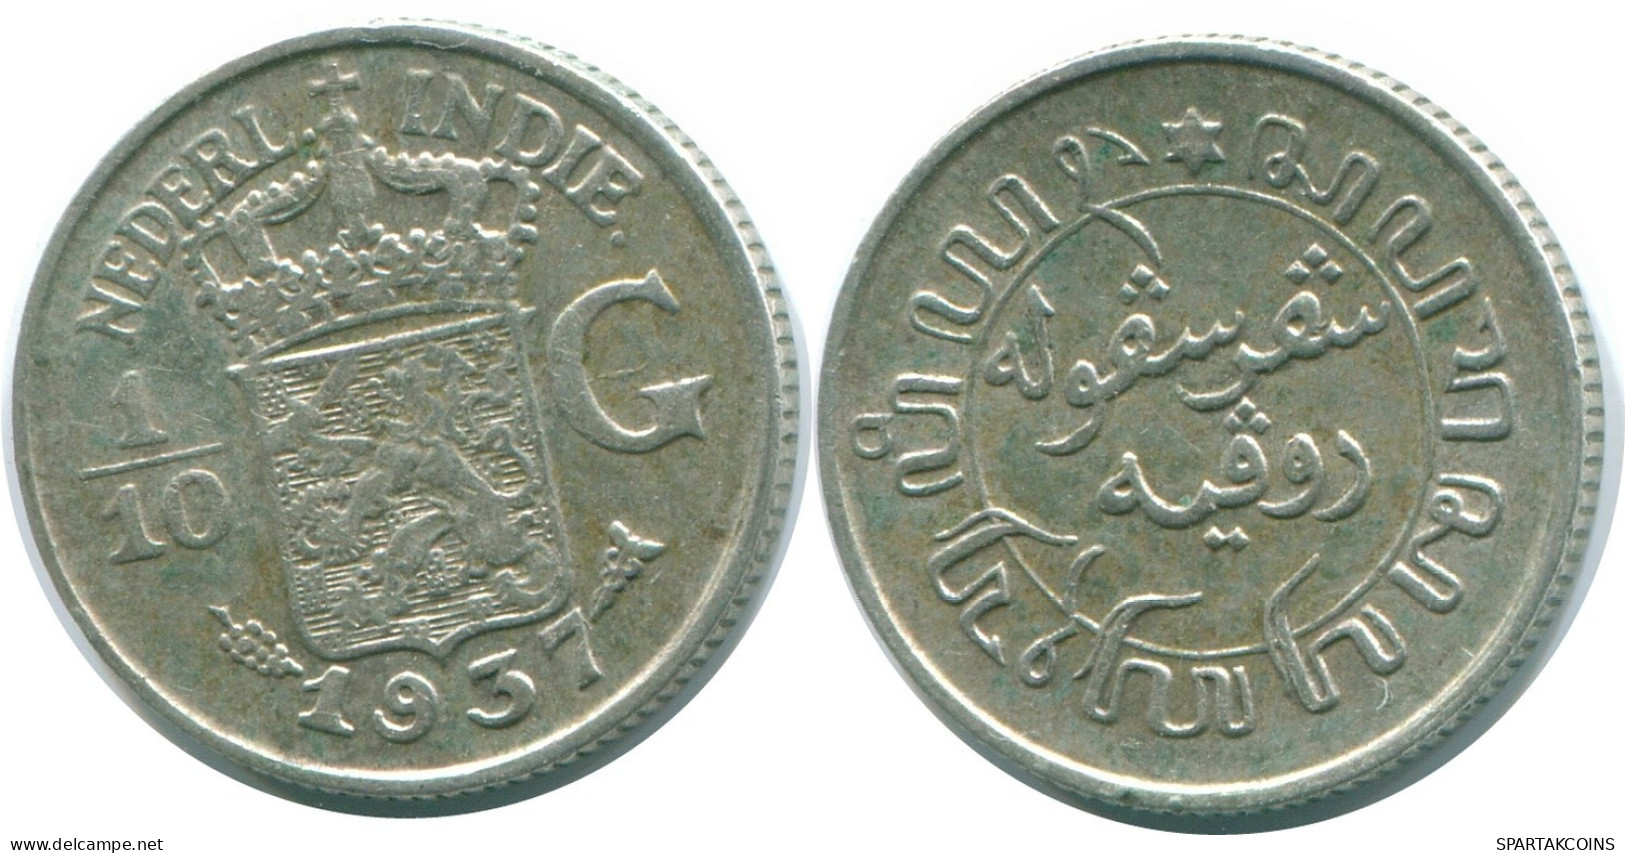 1/10 GULDEN 1937 NETHERLANDS EAST INDIES SILVER Colonial Coin #NL13473.3.U.A - Dutch East Indies